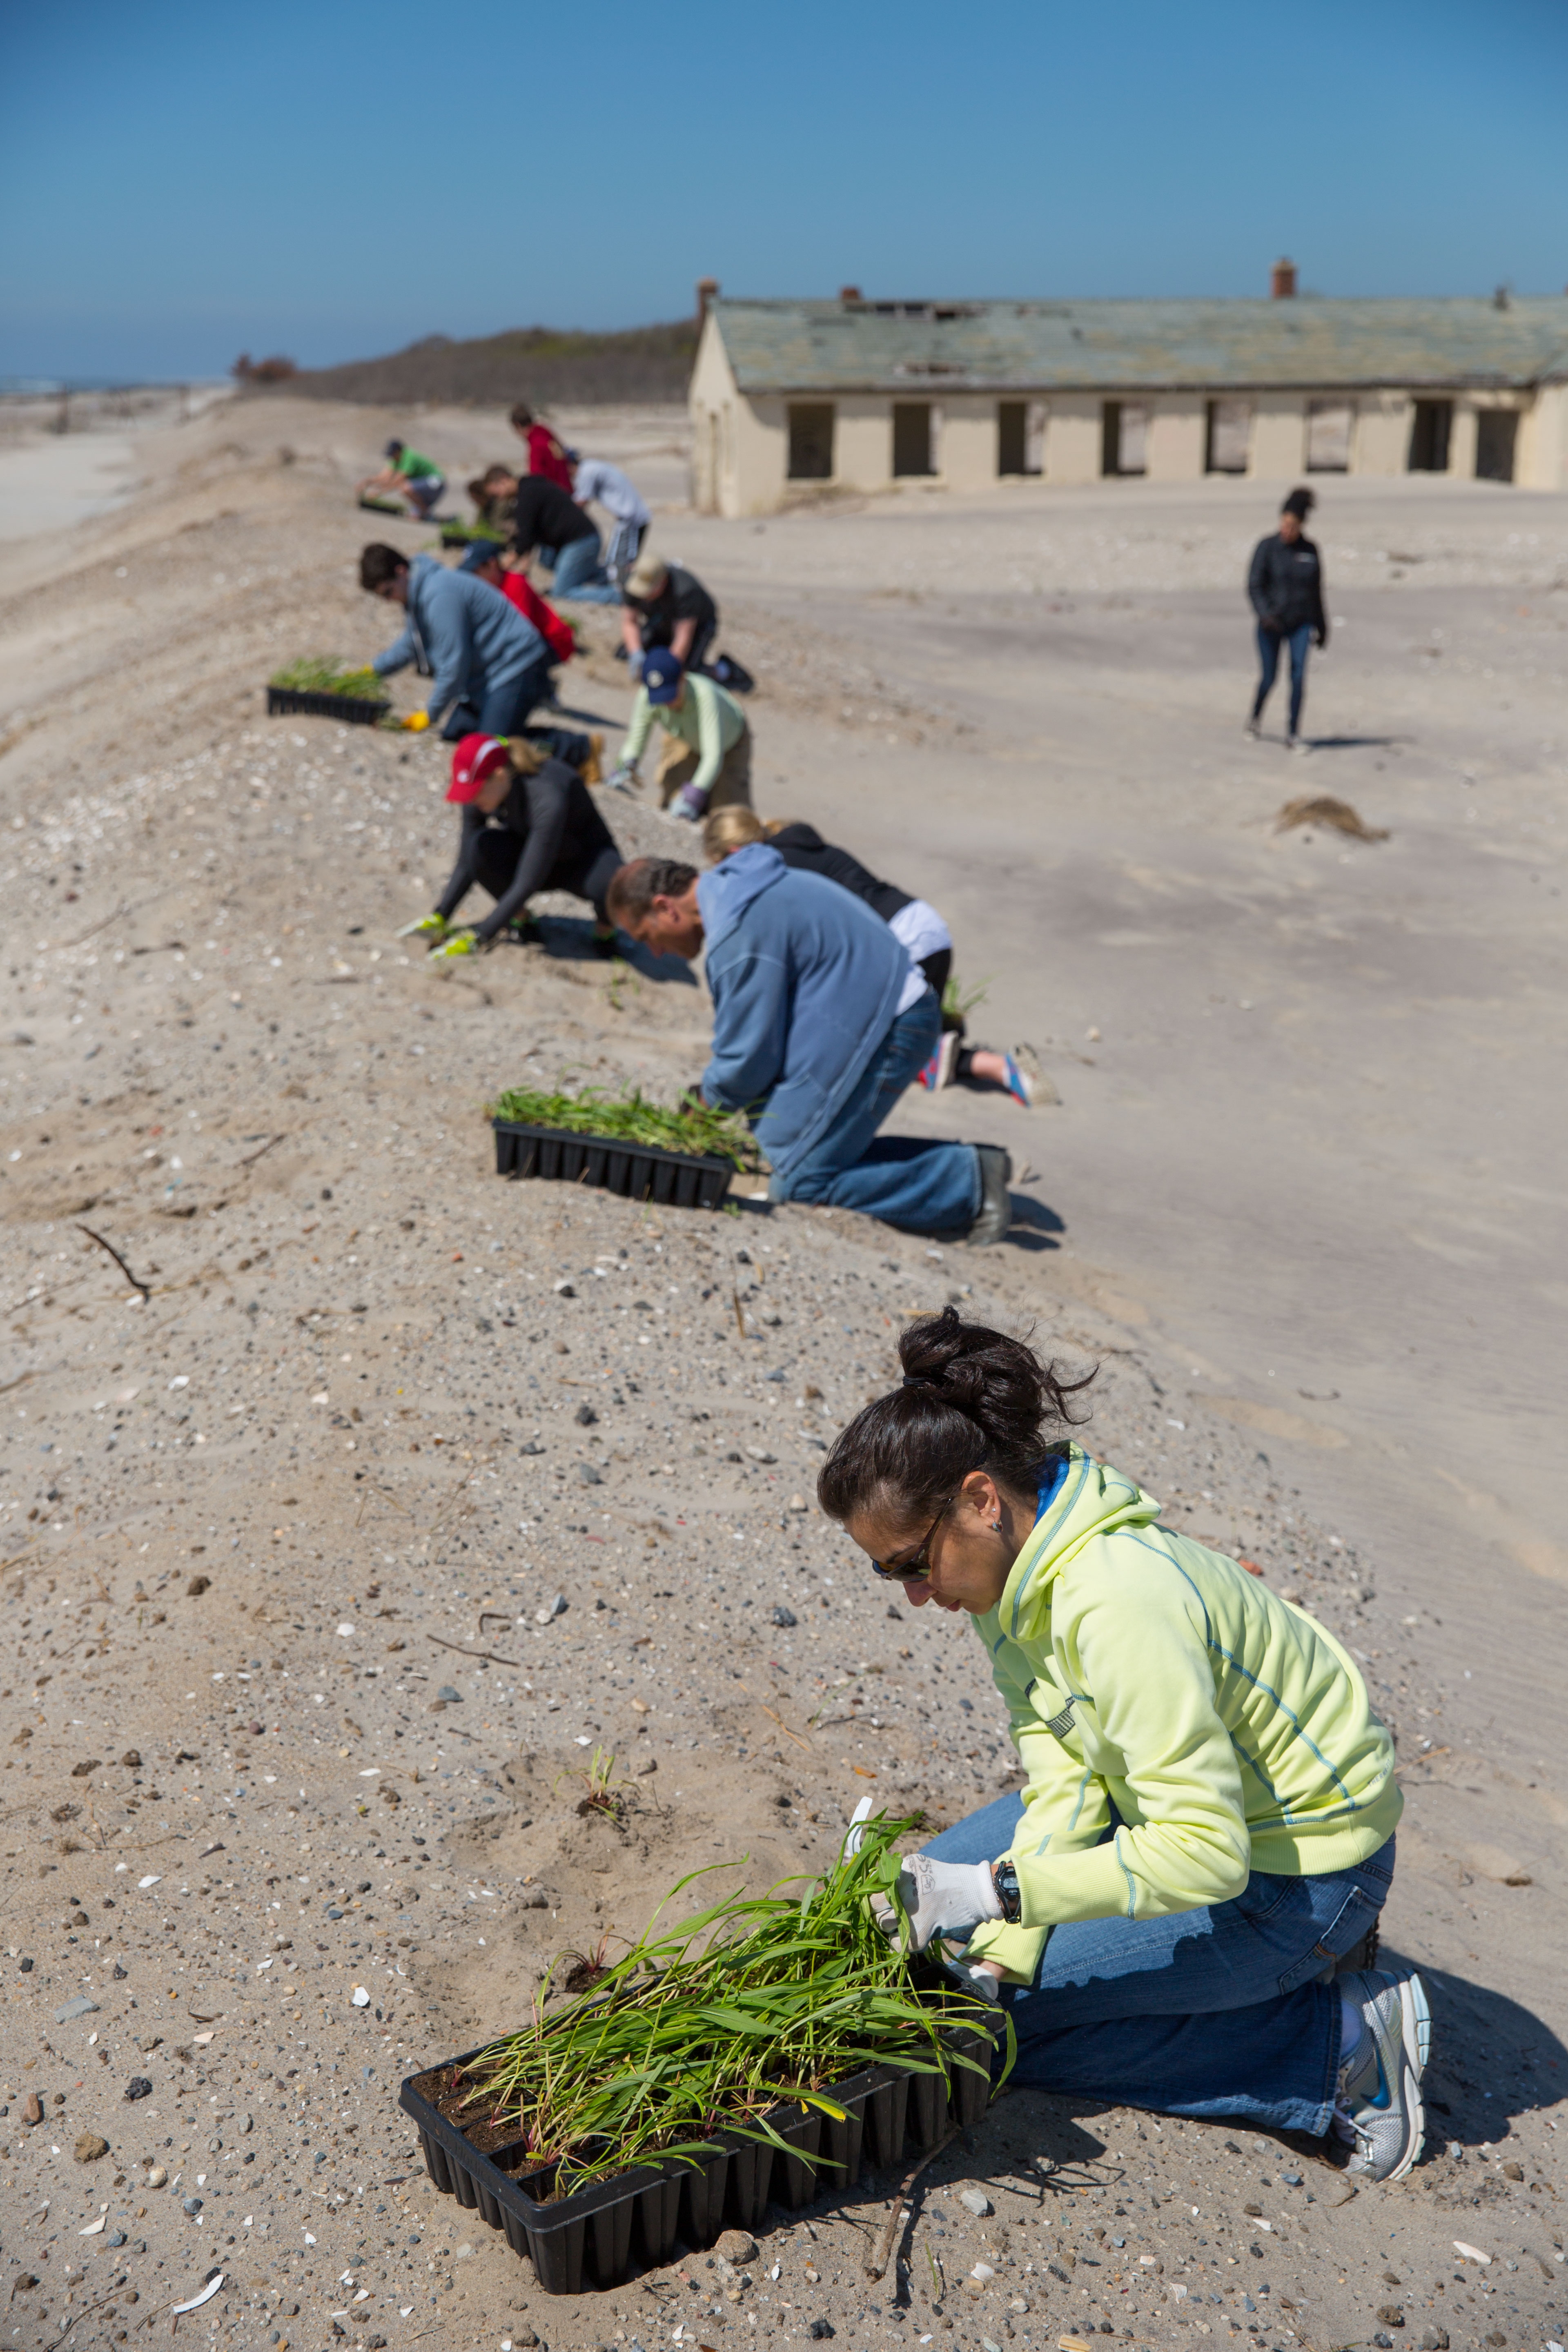 NWF volunteers spent the day planting native grasses to help rebuild dunes devastated by Hurricane Sandy